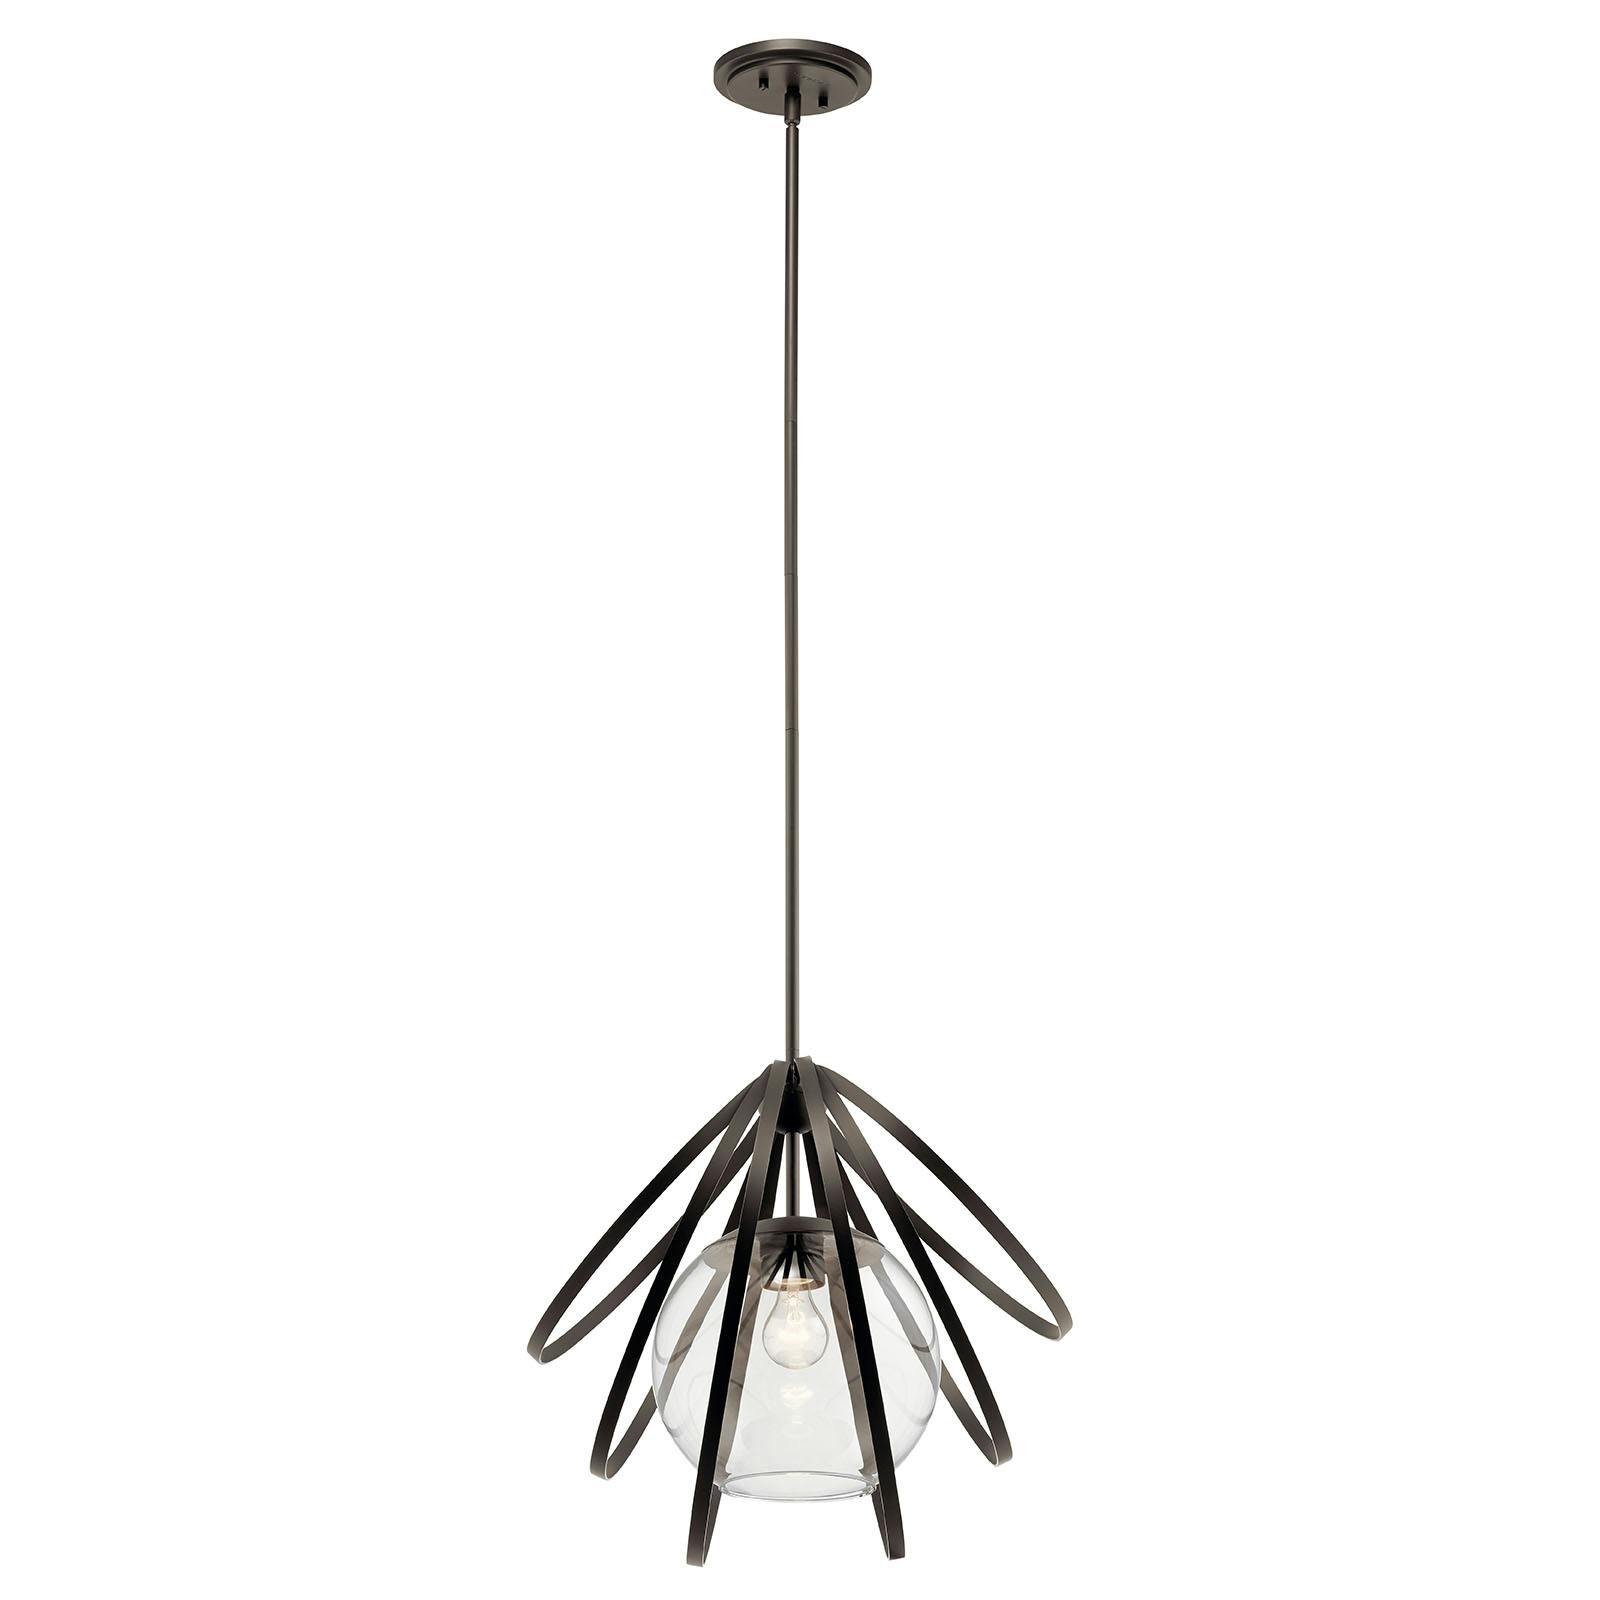 Profile view of the Kerti™ 18" 1 Light Pendant Olde Bronze® on a white background